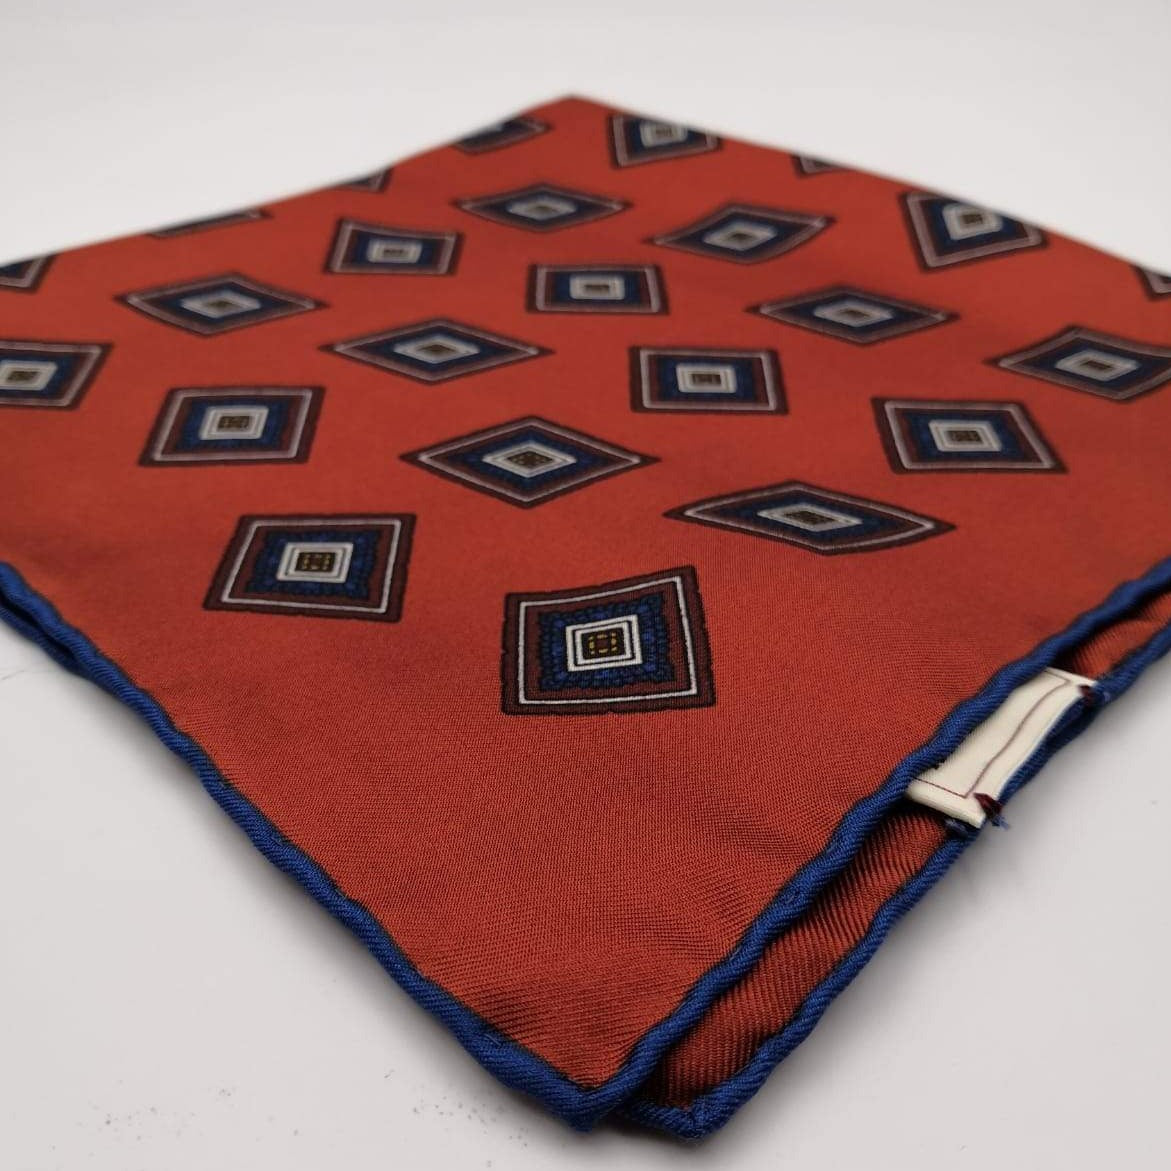 Cruciani & Bella 100% Silk Hand-rolled   Red and Blue Patterned  Motif  Pocket Square Handmade in Italy 40 cm X 40cm #4466